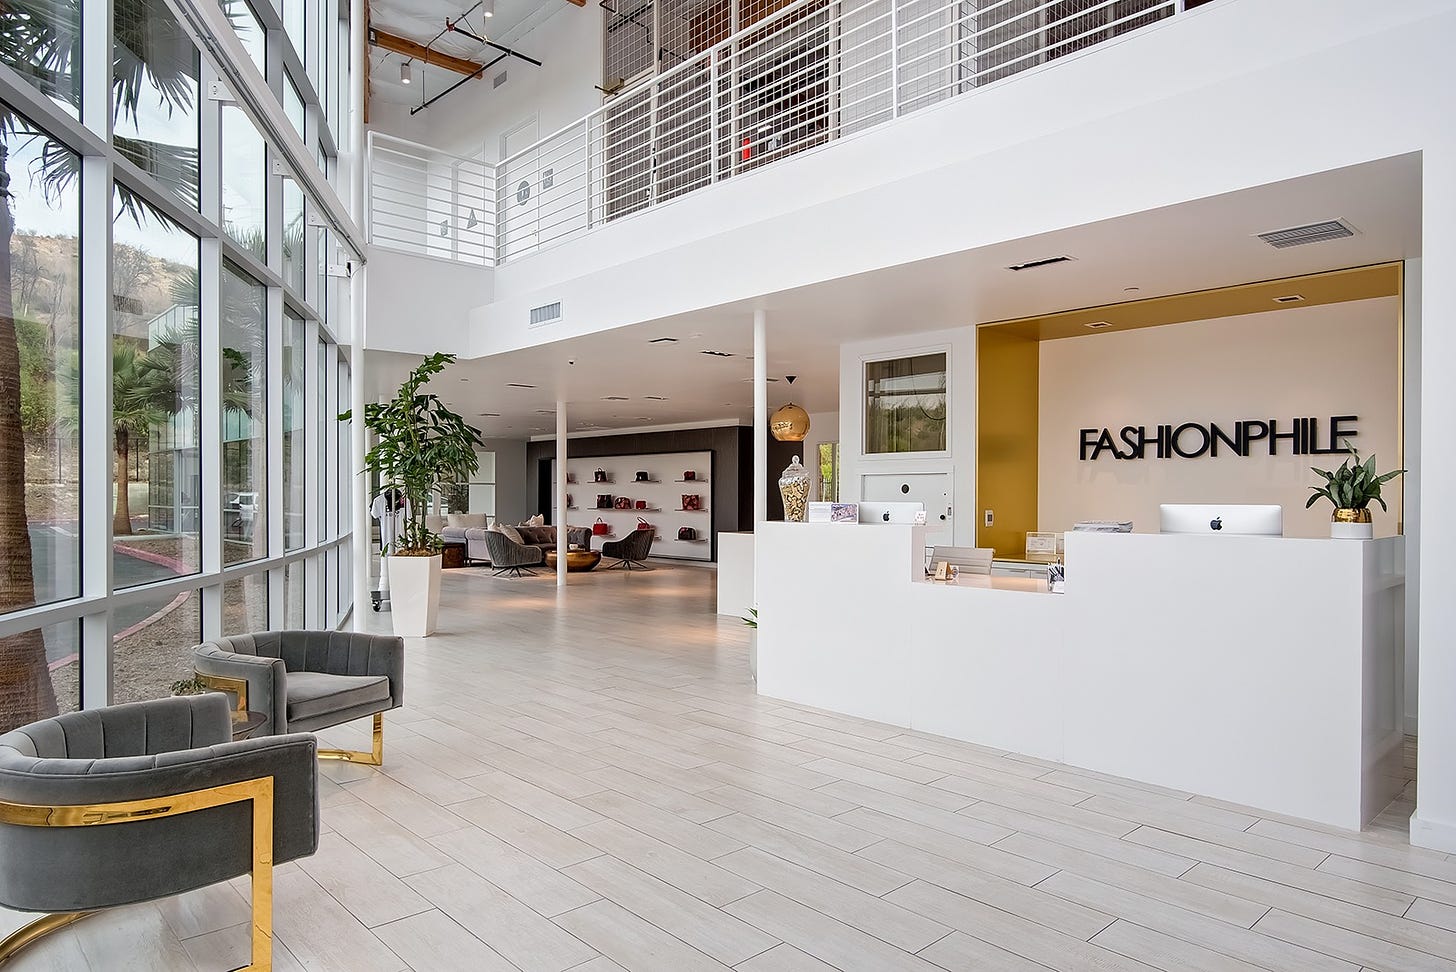 A Tour of Fashionphile's Cool New Carlsbad Office - Officelovin'